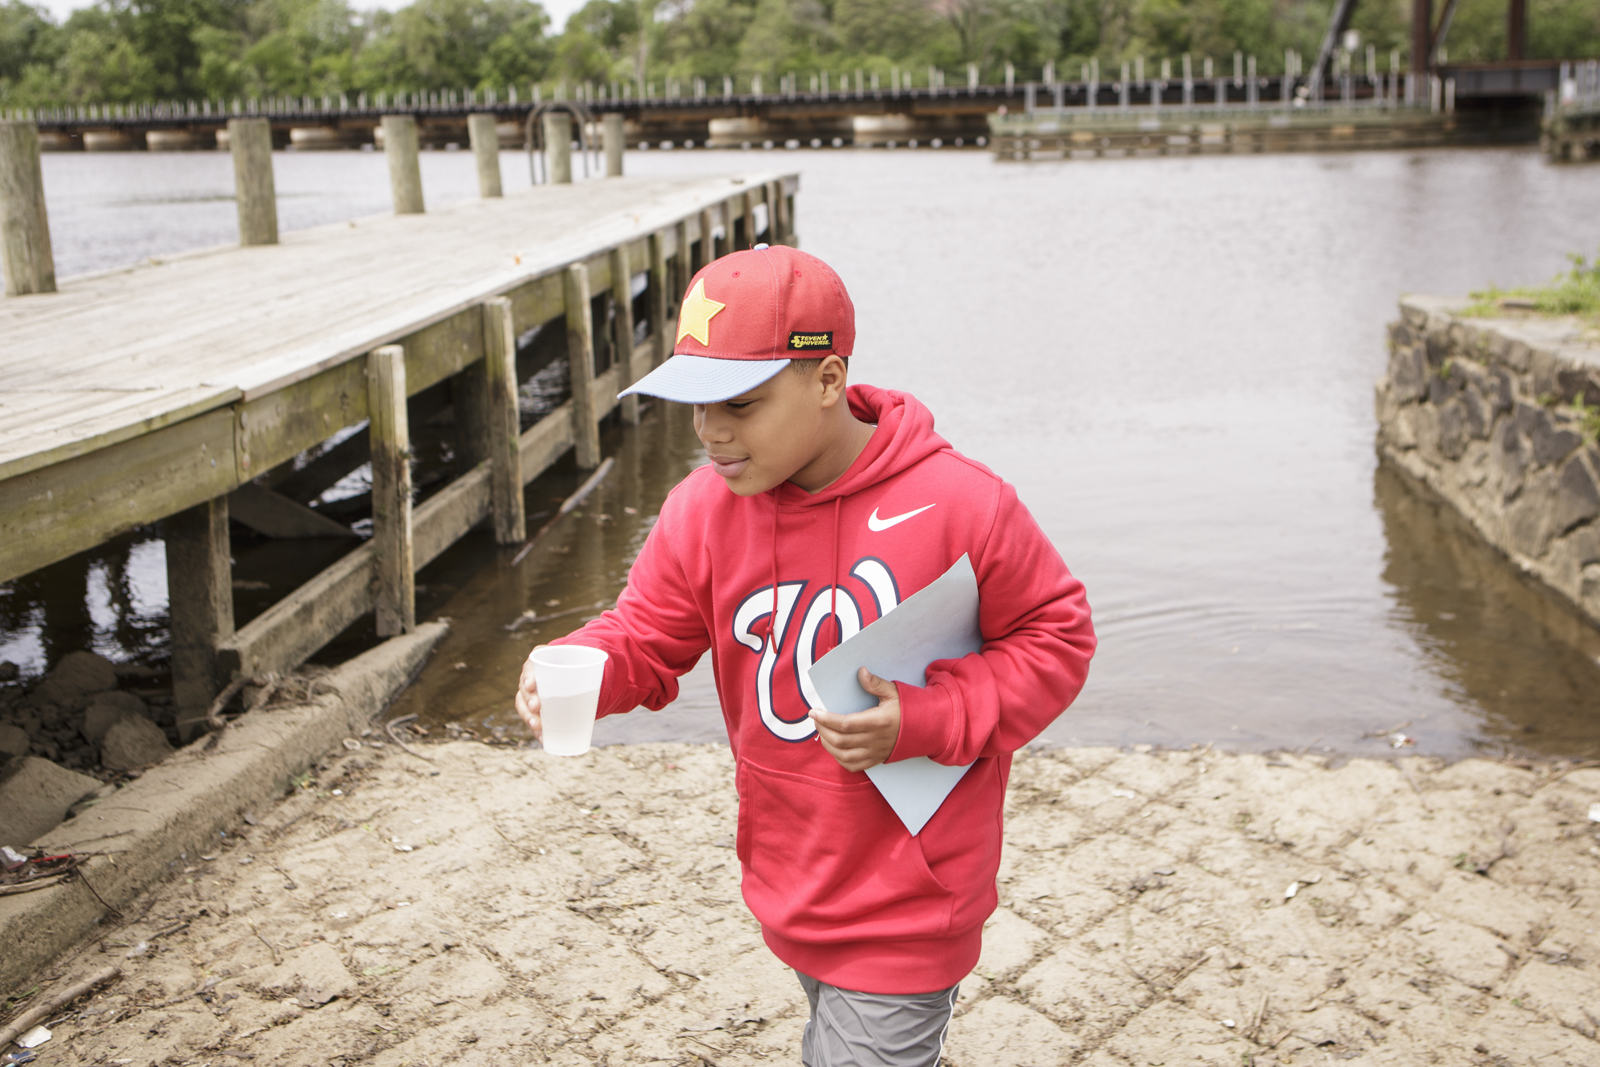  A student returns after releasing American shad fry into the Anacostia River. In 2017, D.C. mayor Muriel Bowser declared American shad the official fish of Washington, D.C. Though the Potomac is fully restored, American shad in the Anacostia are not